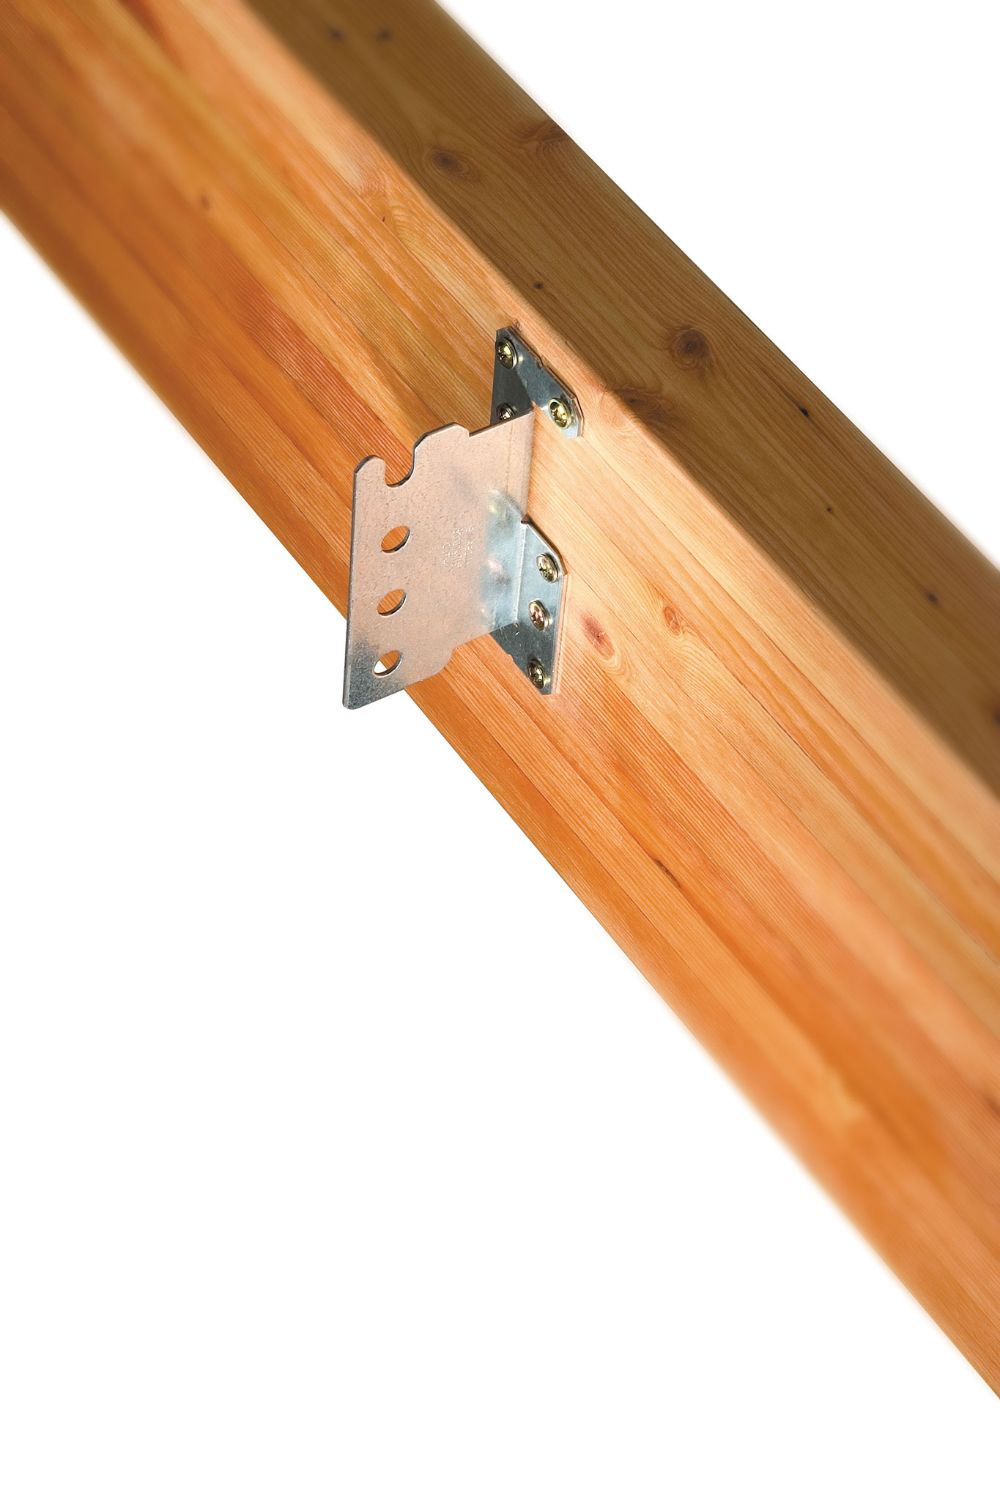 Simpson CJT5ZS Concealed Joist Tie w Short Pins ZMAX Finish image 2 of 5